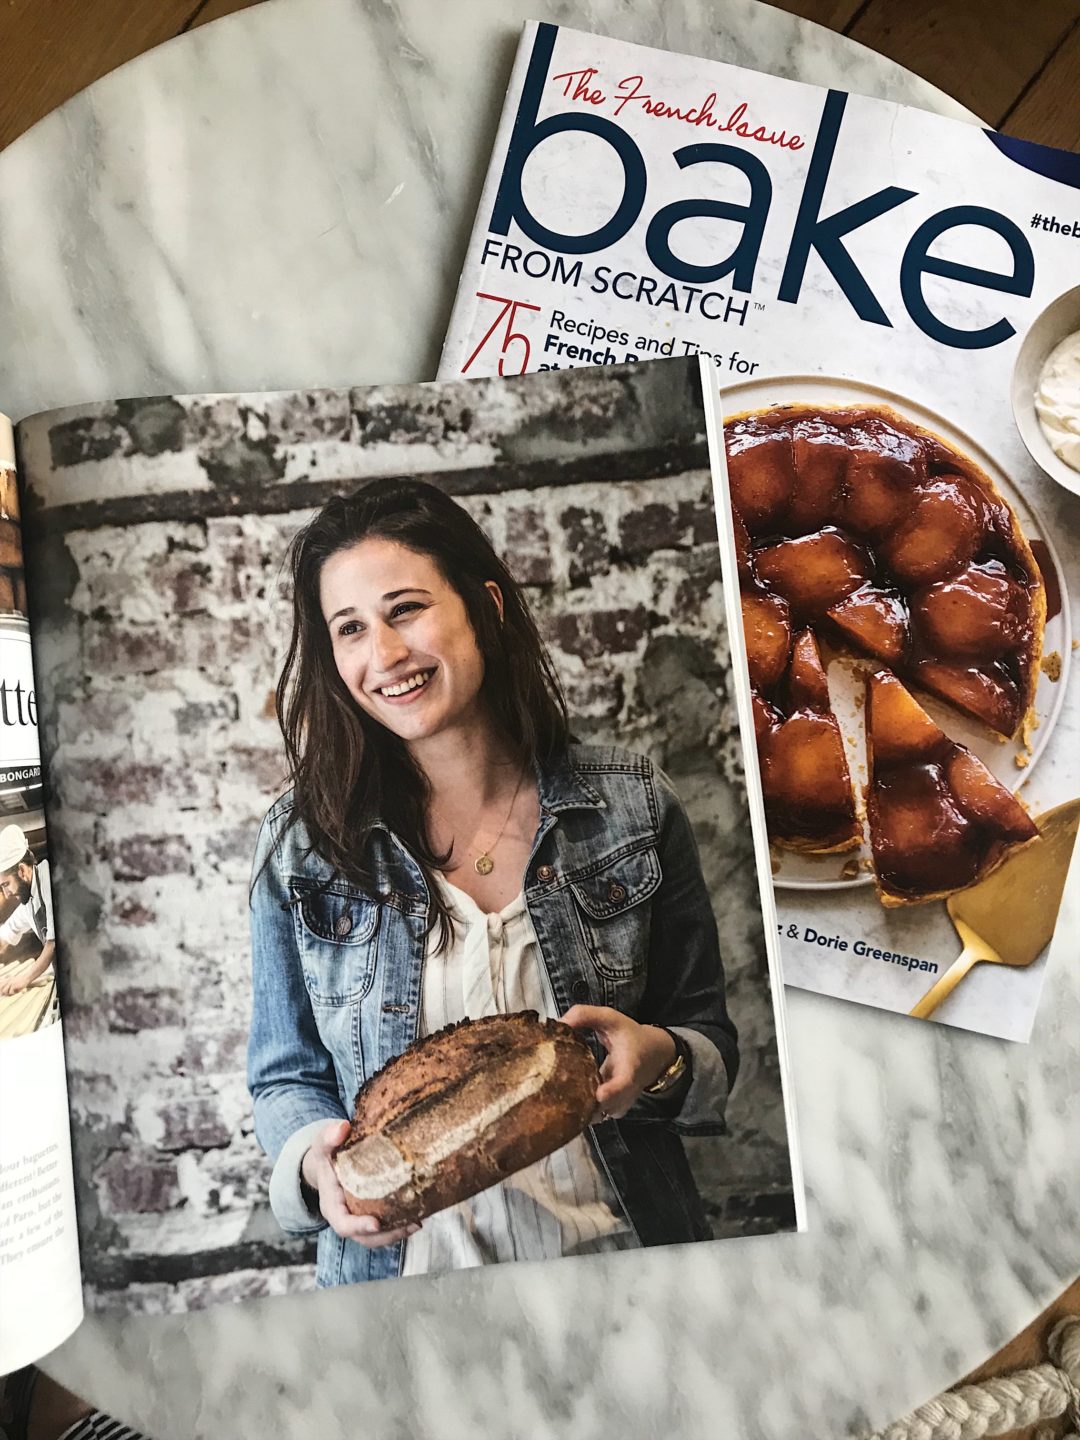 Lindsey Tramuta Bake from Scratch French Issue 2019